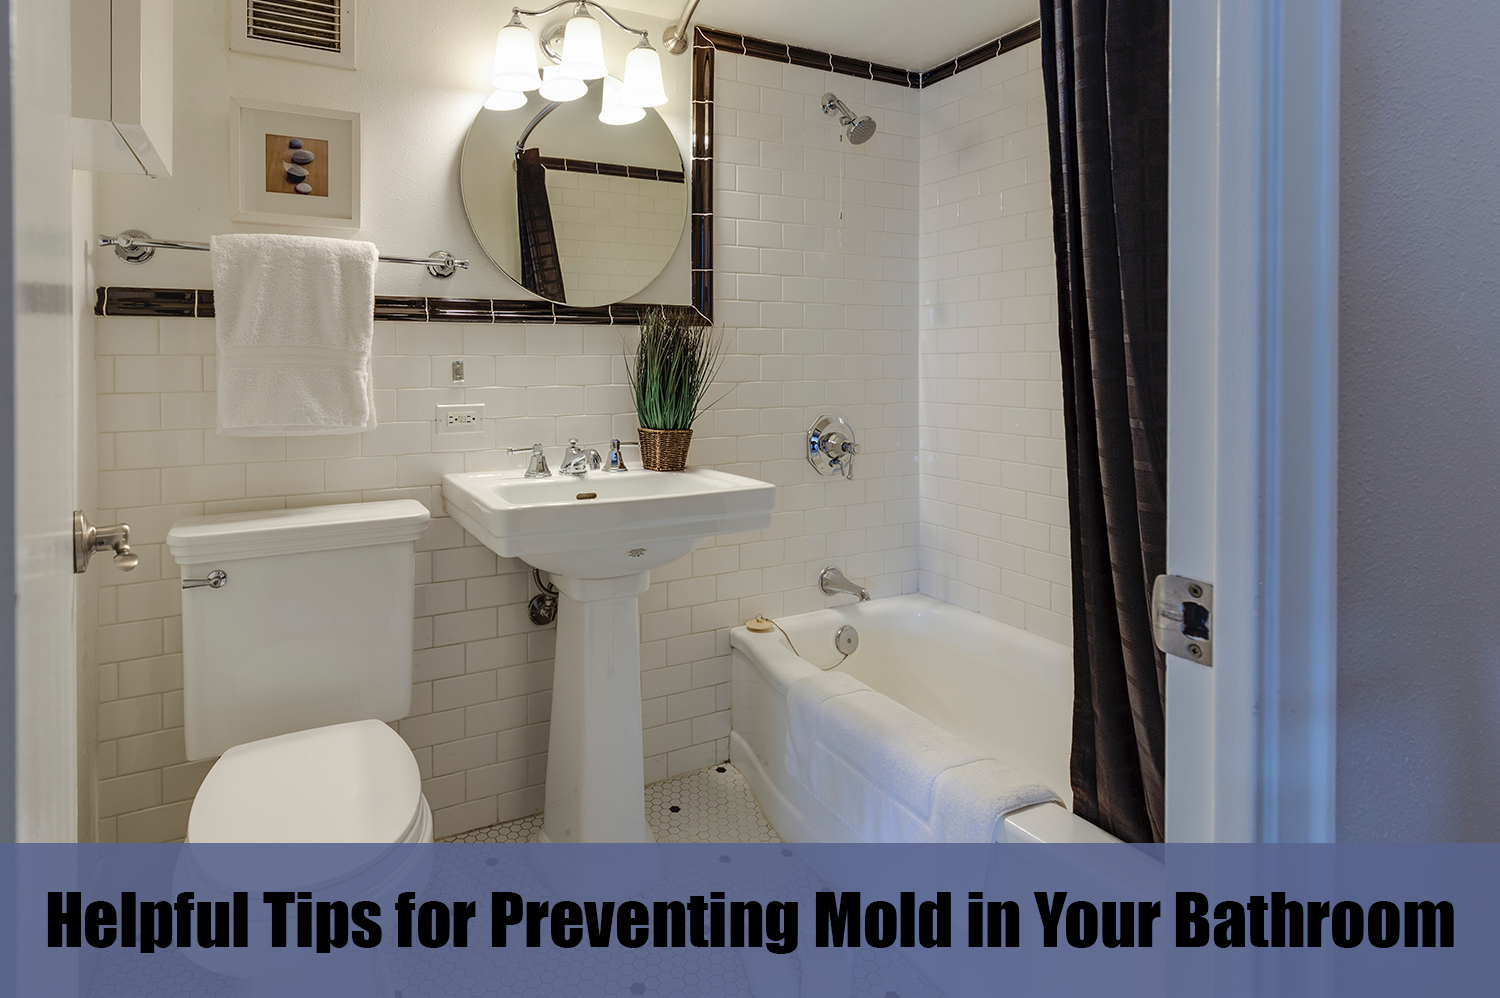 A clean toilet, shower, bathtub, and sink in a home to prevent mold in your bathroom.